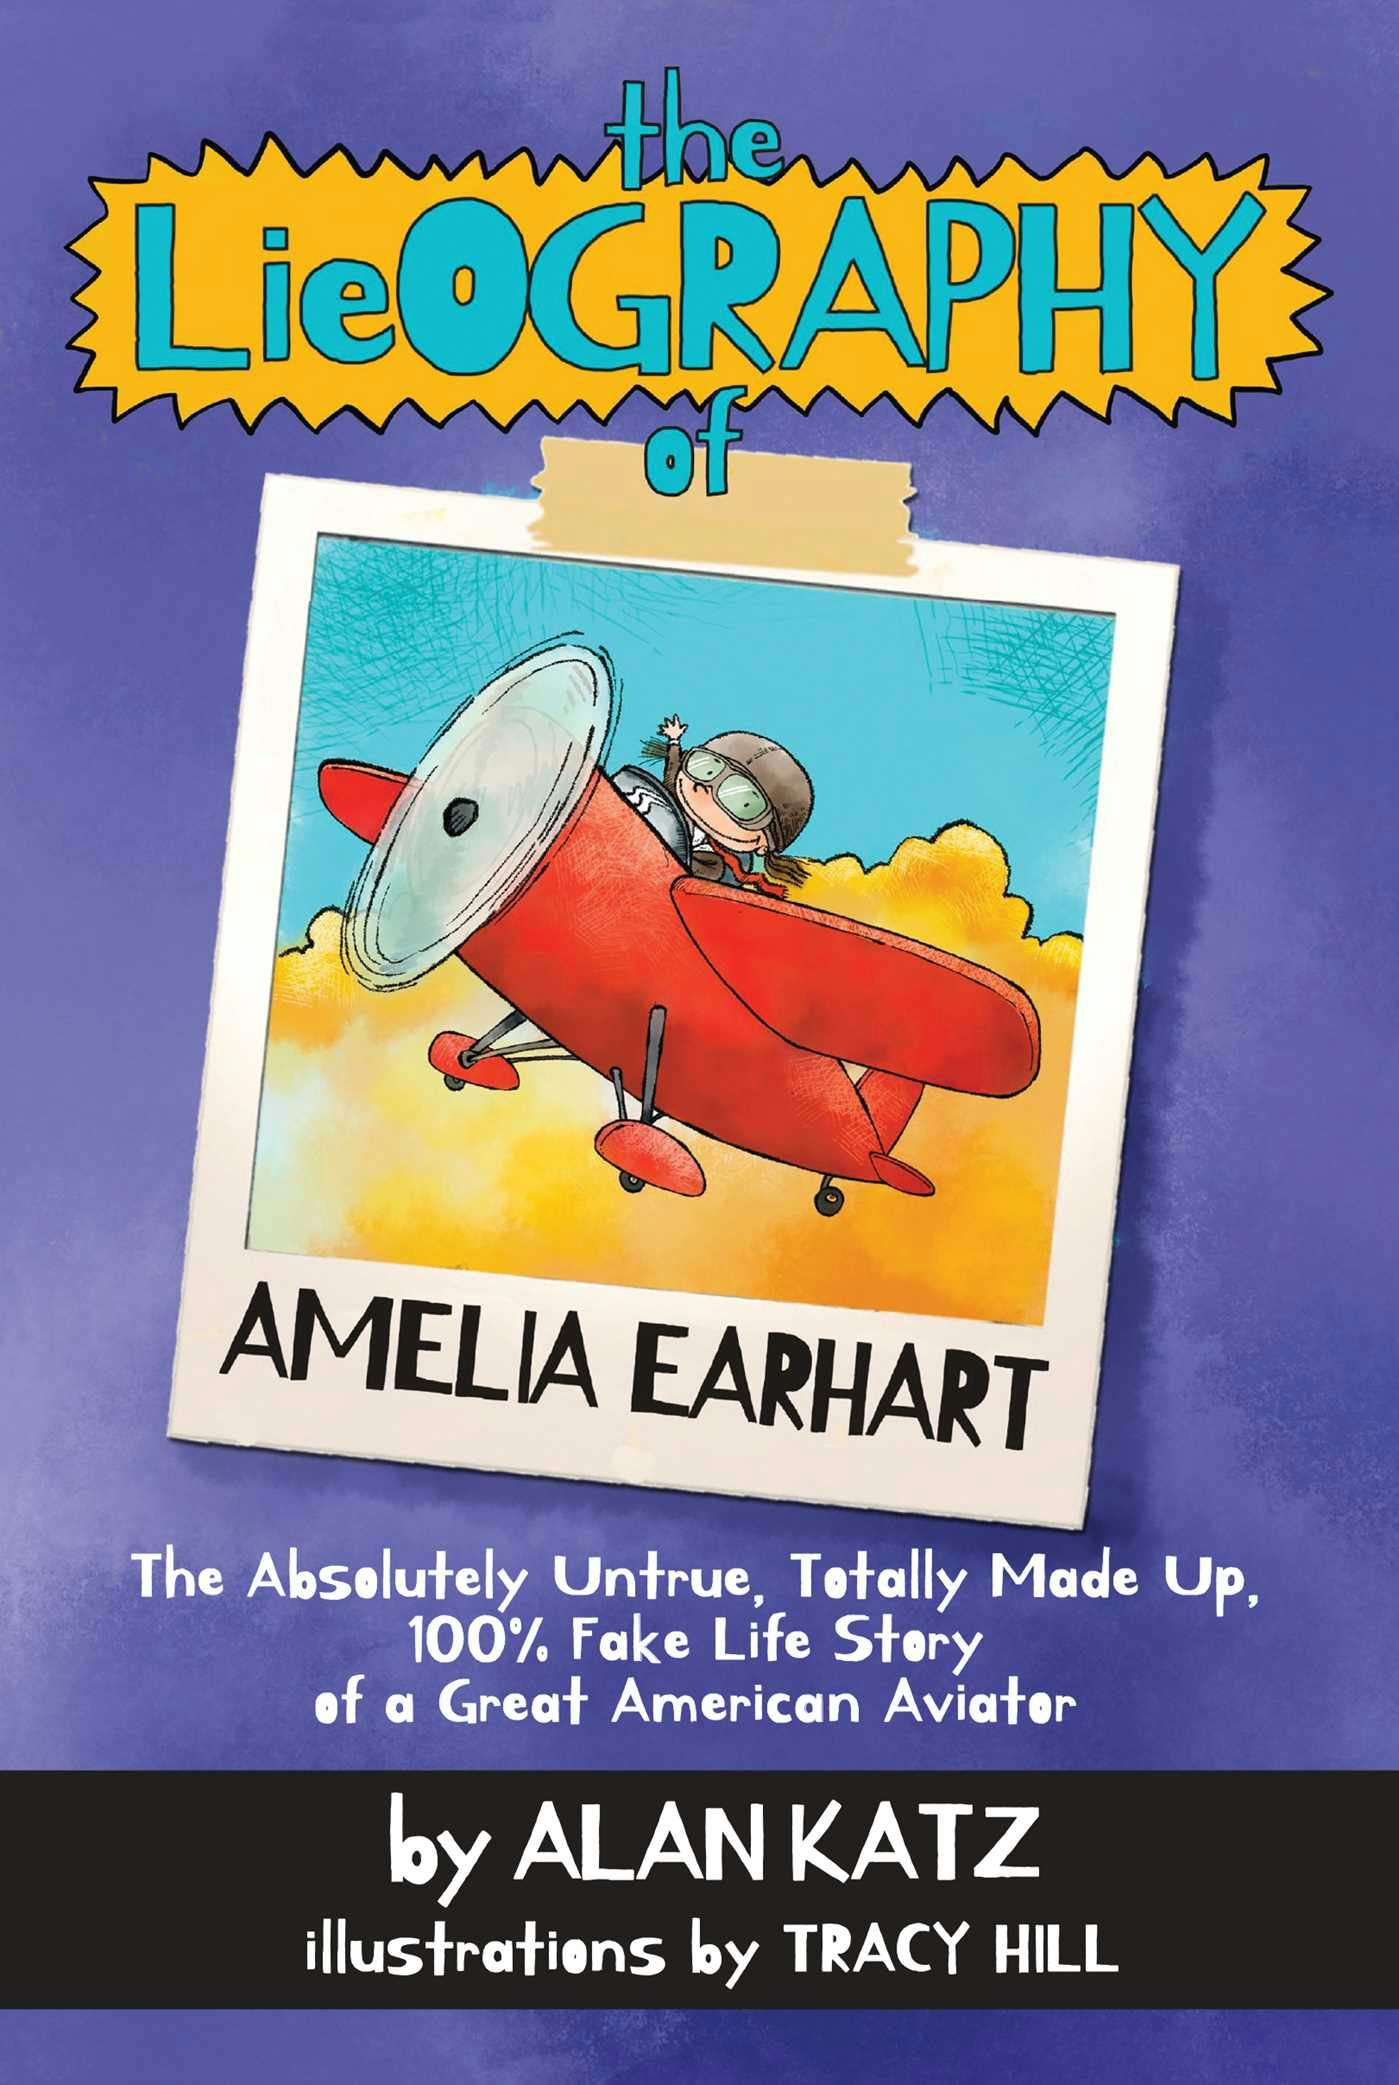 The Lieography of Amelia Earhart: The Absolutely Untrue, Totally Made Up, 100% Fake Life Story of a Great American Aviator - Alan Katz